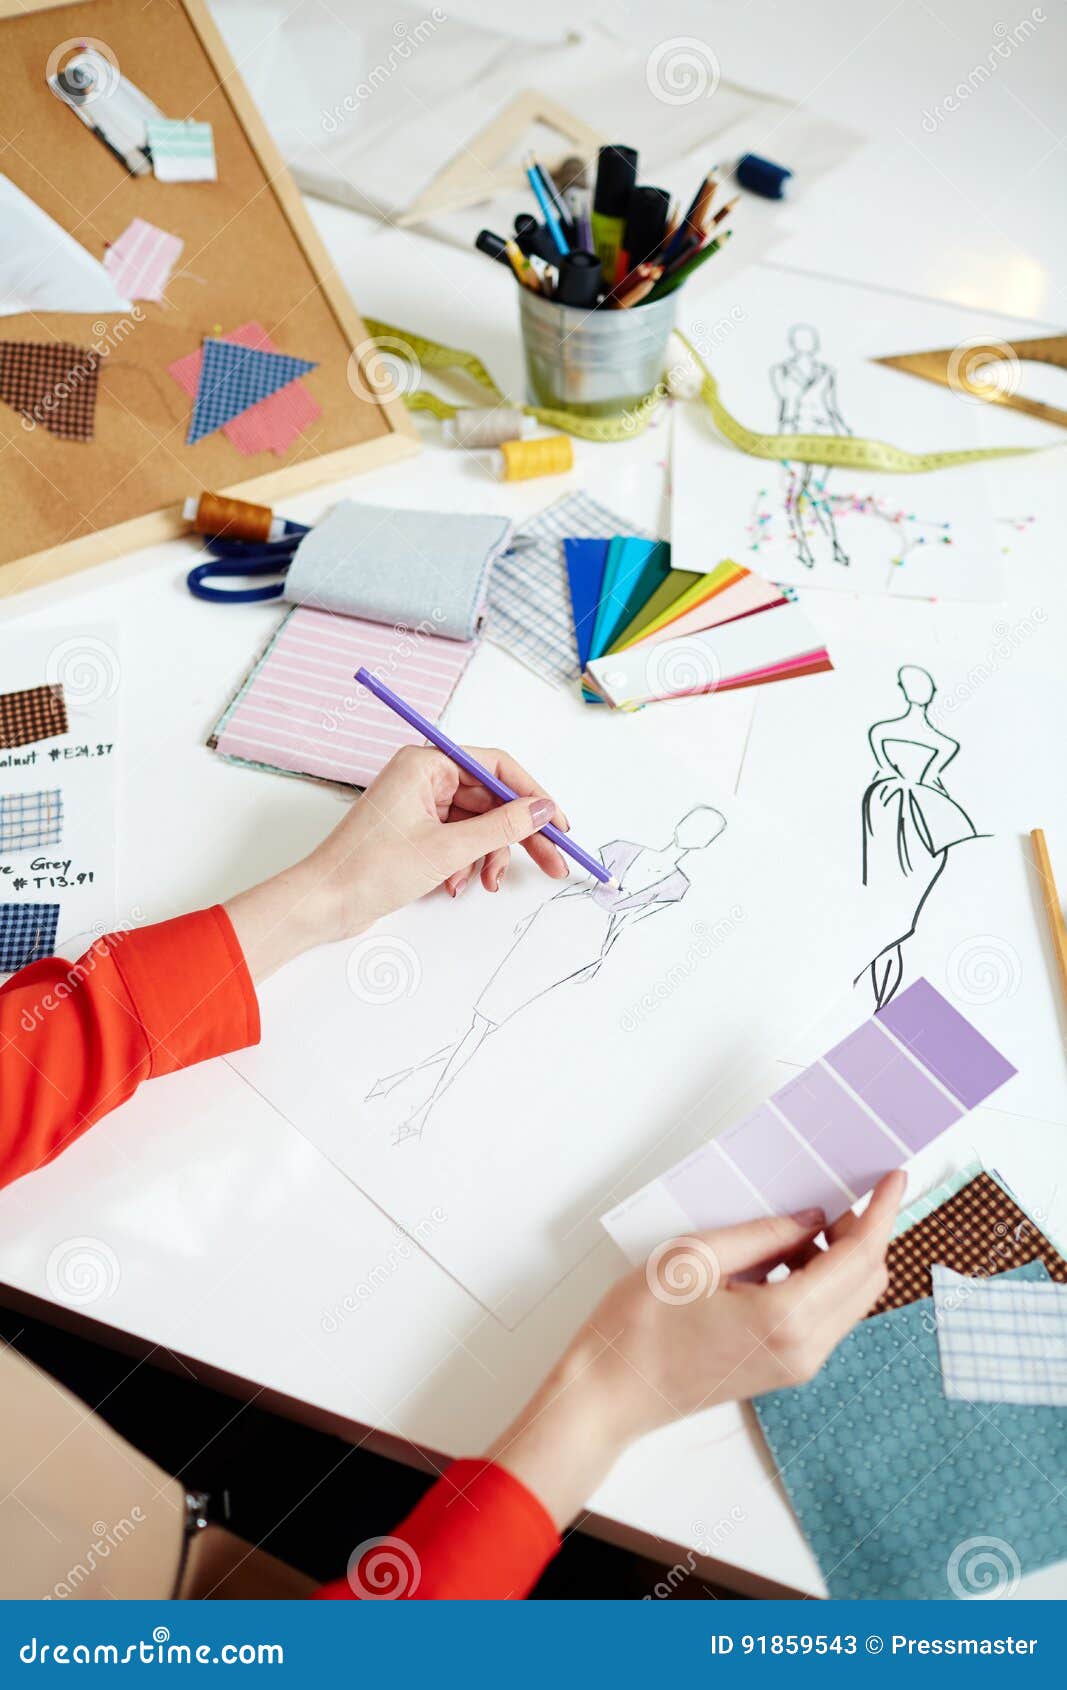 Coloring sketch stock image. Image of sample, tailor - 91859543